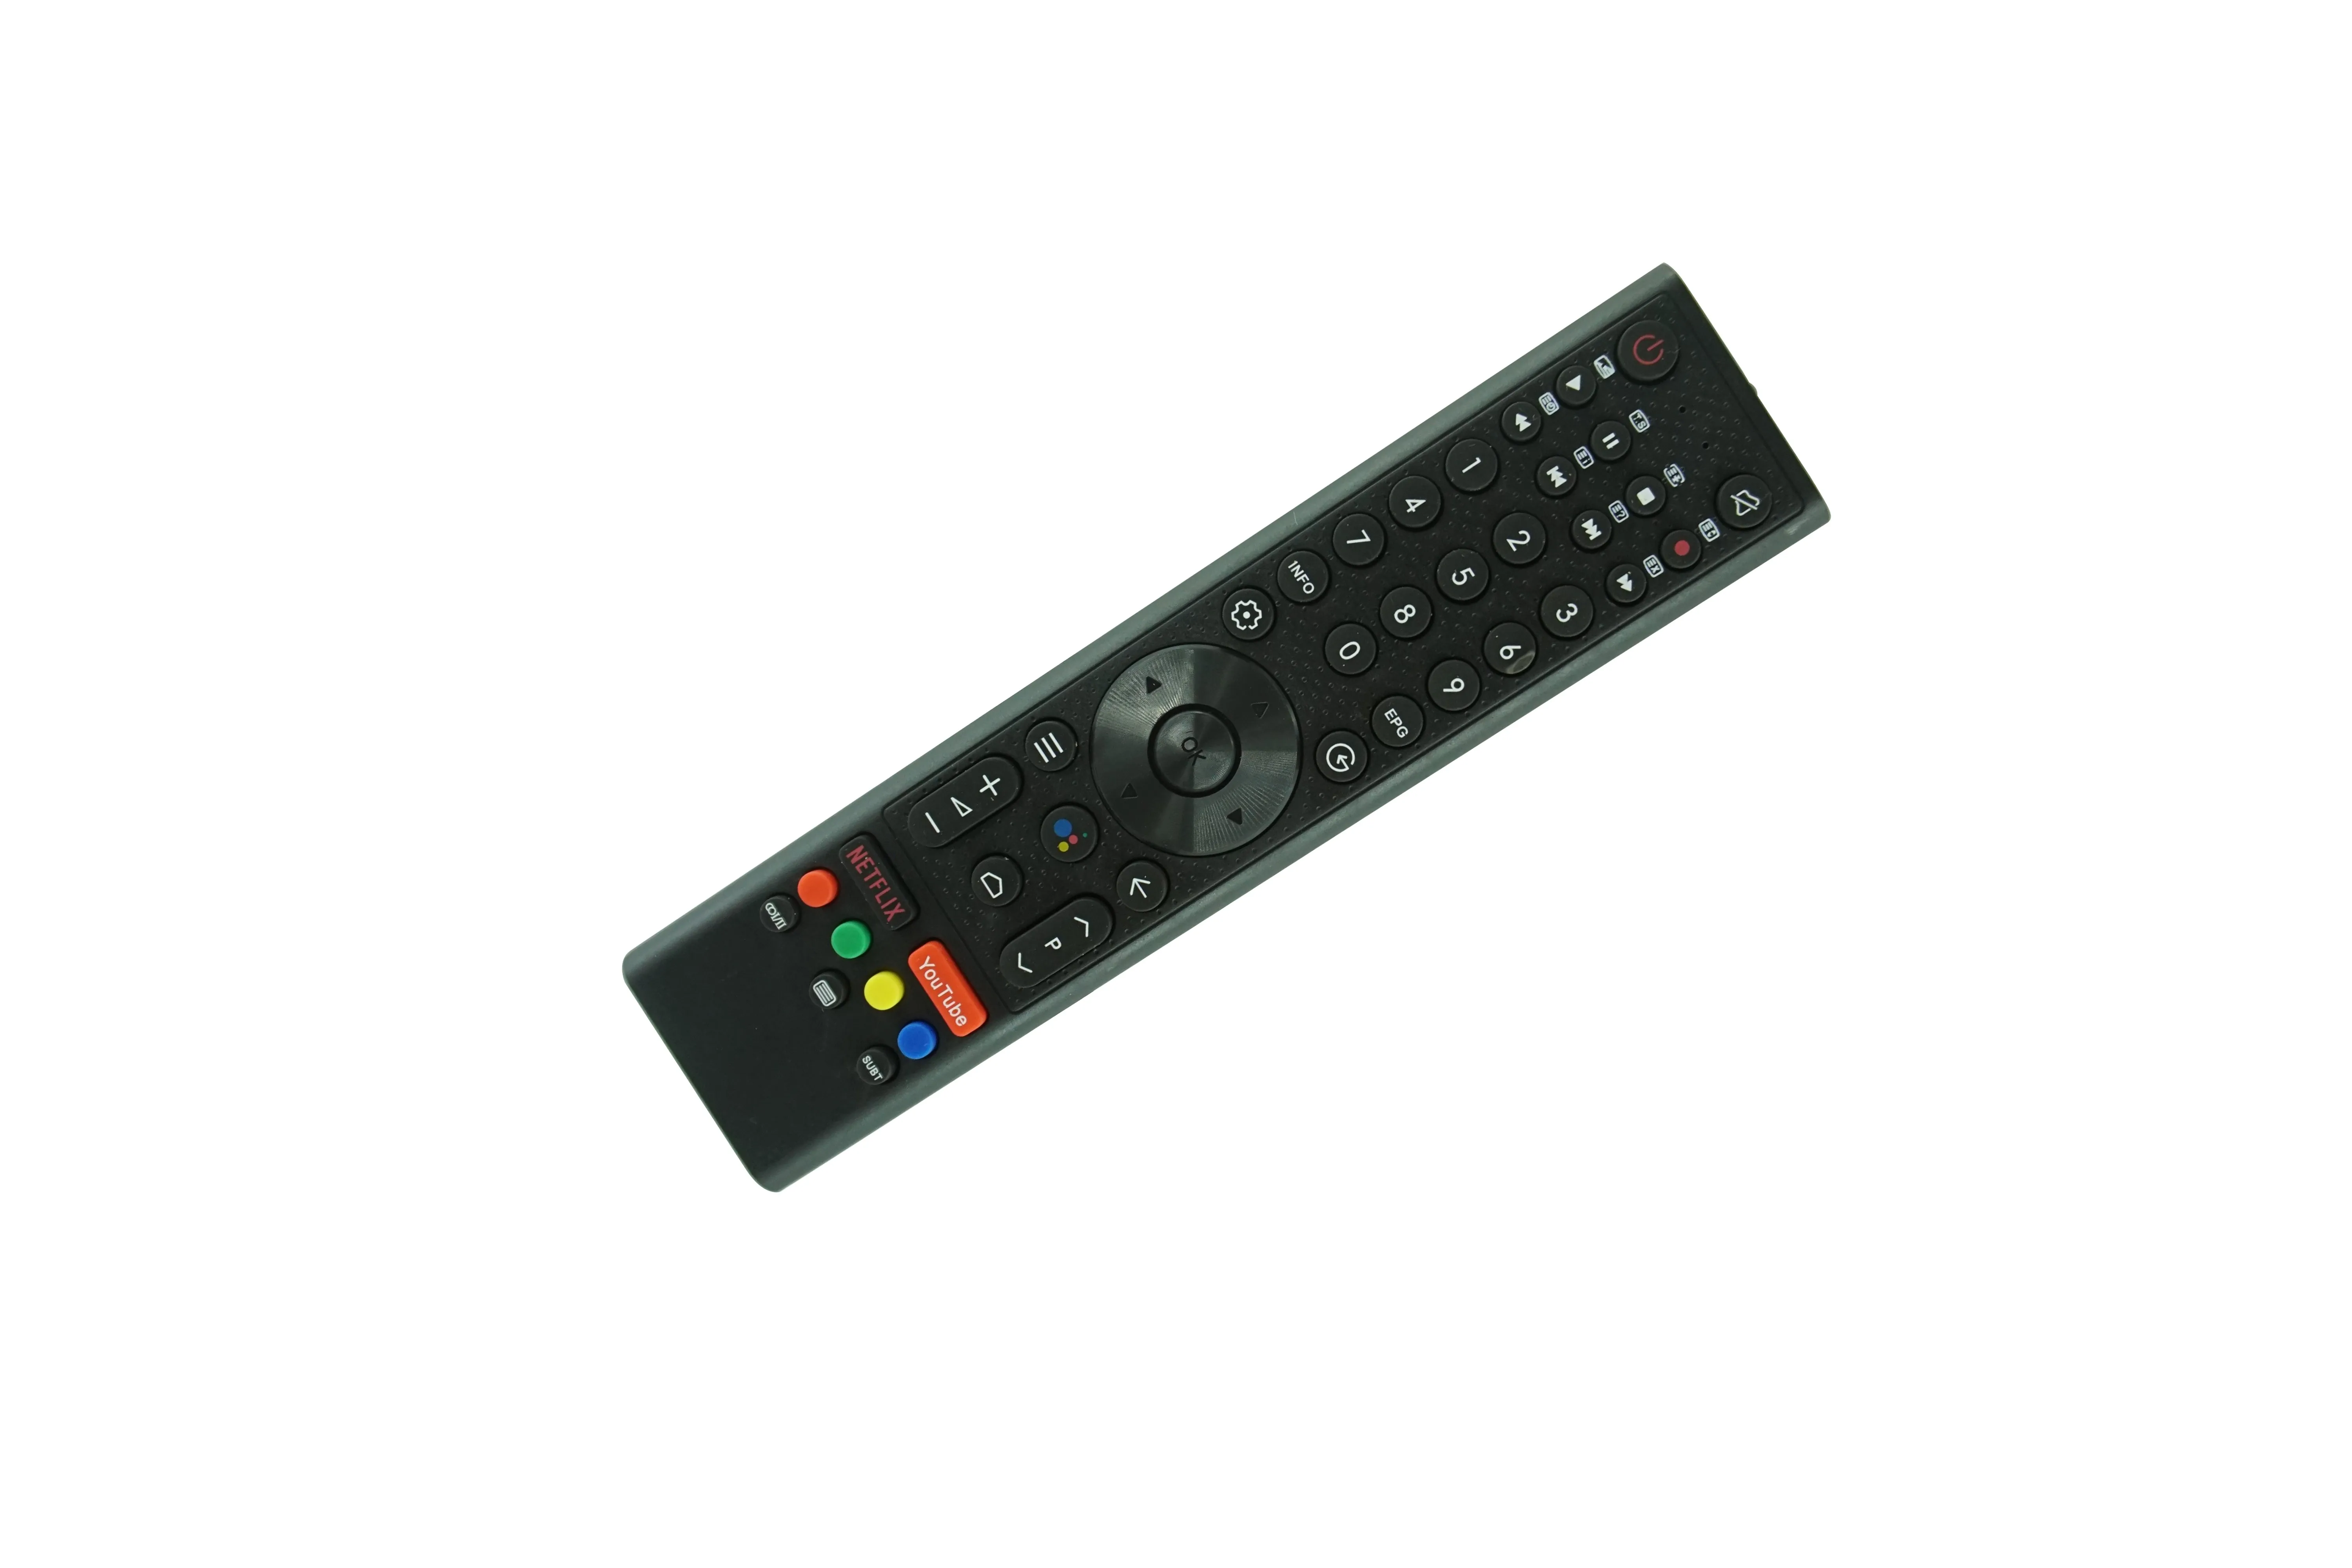 

Voice Bluetooeh Remote Control For CHANGHONG GCBLTVC0GBBT-C3 GCBLTVC0GBBT-C4 GCBLTVC0GBBT-C5 GCBLTVC0GBBT-THOMSON LCD LED TV